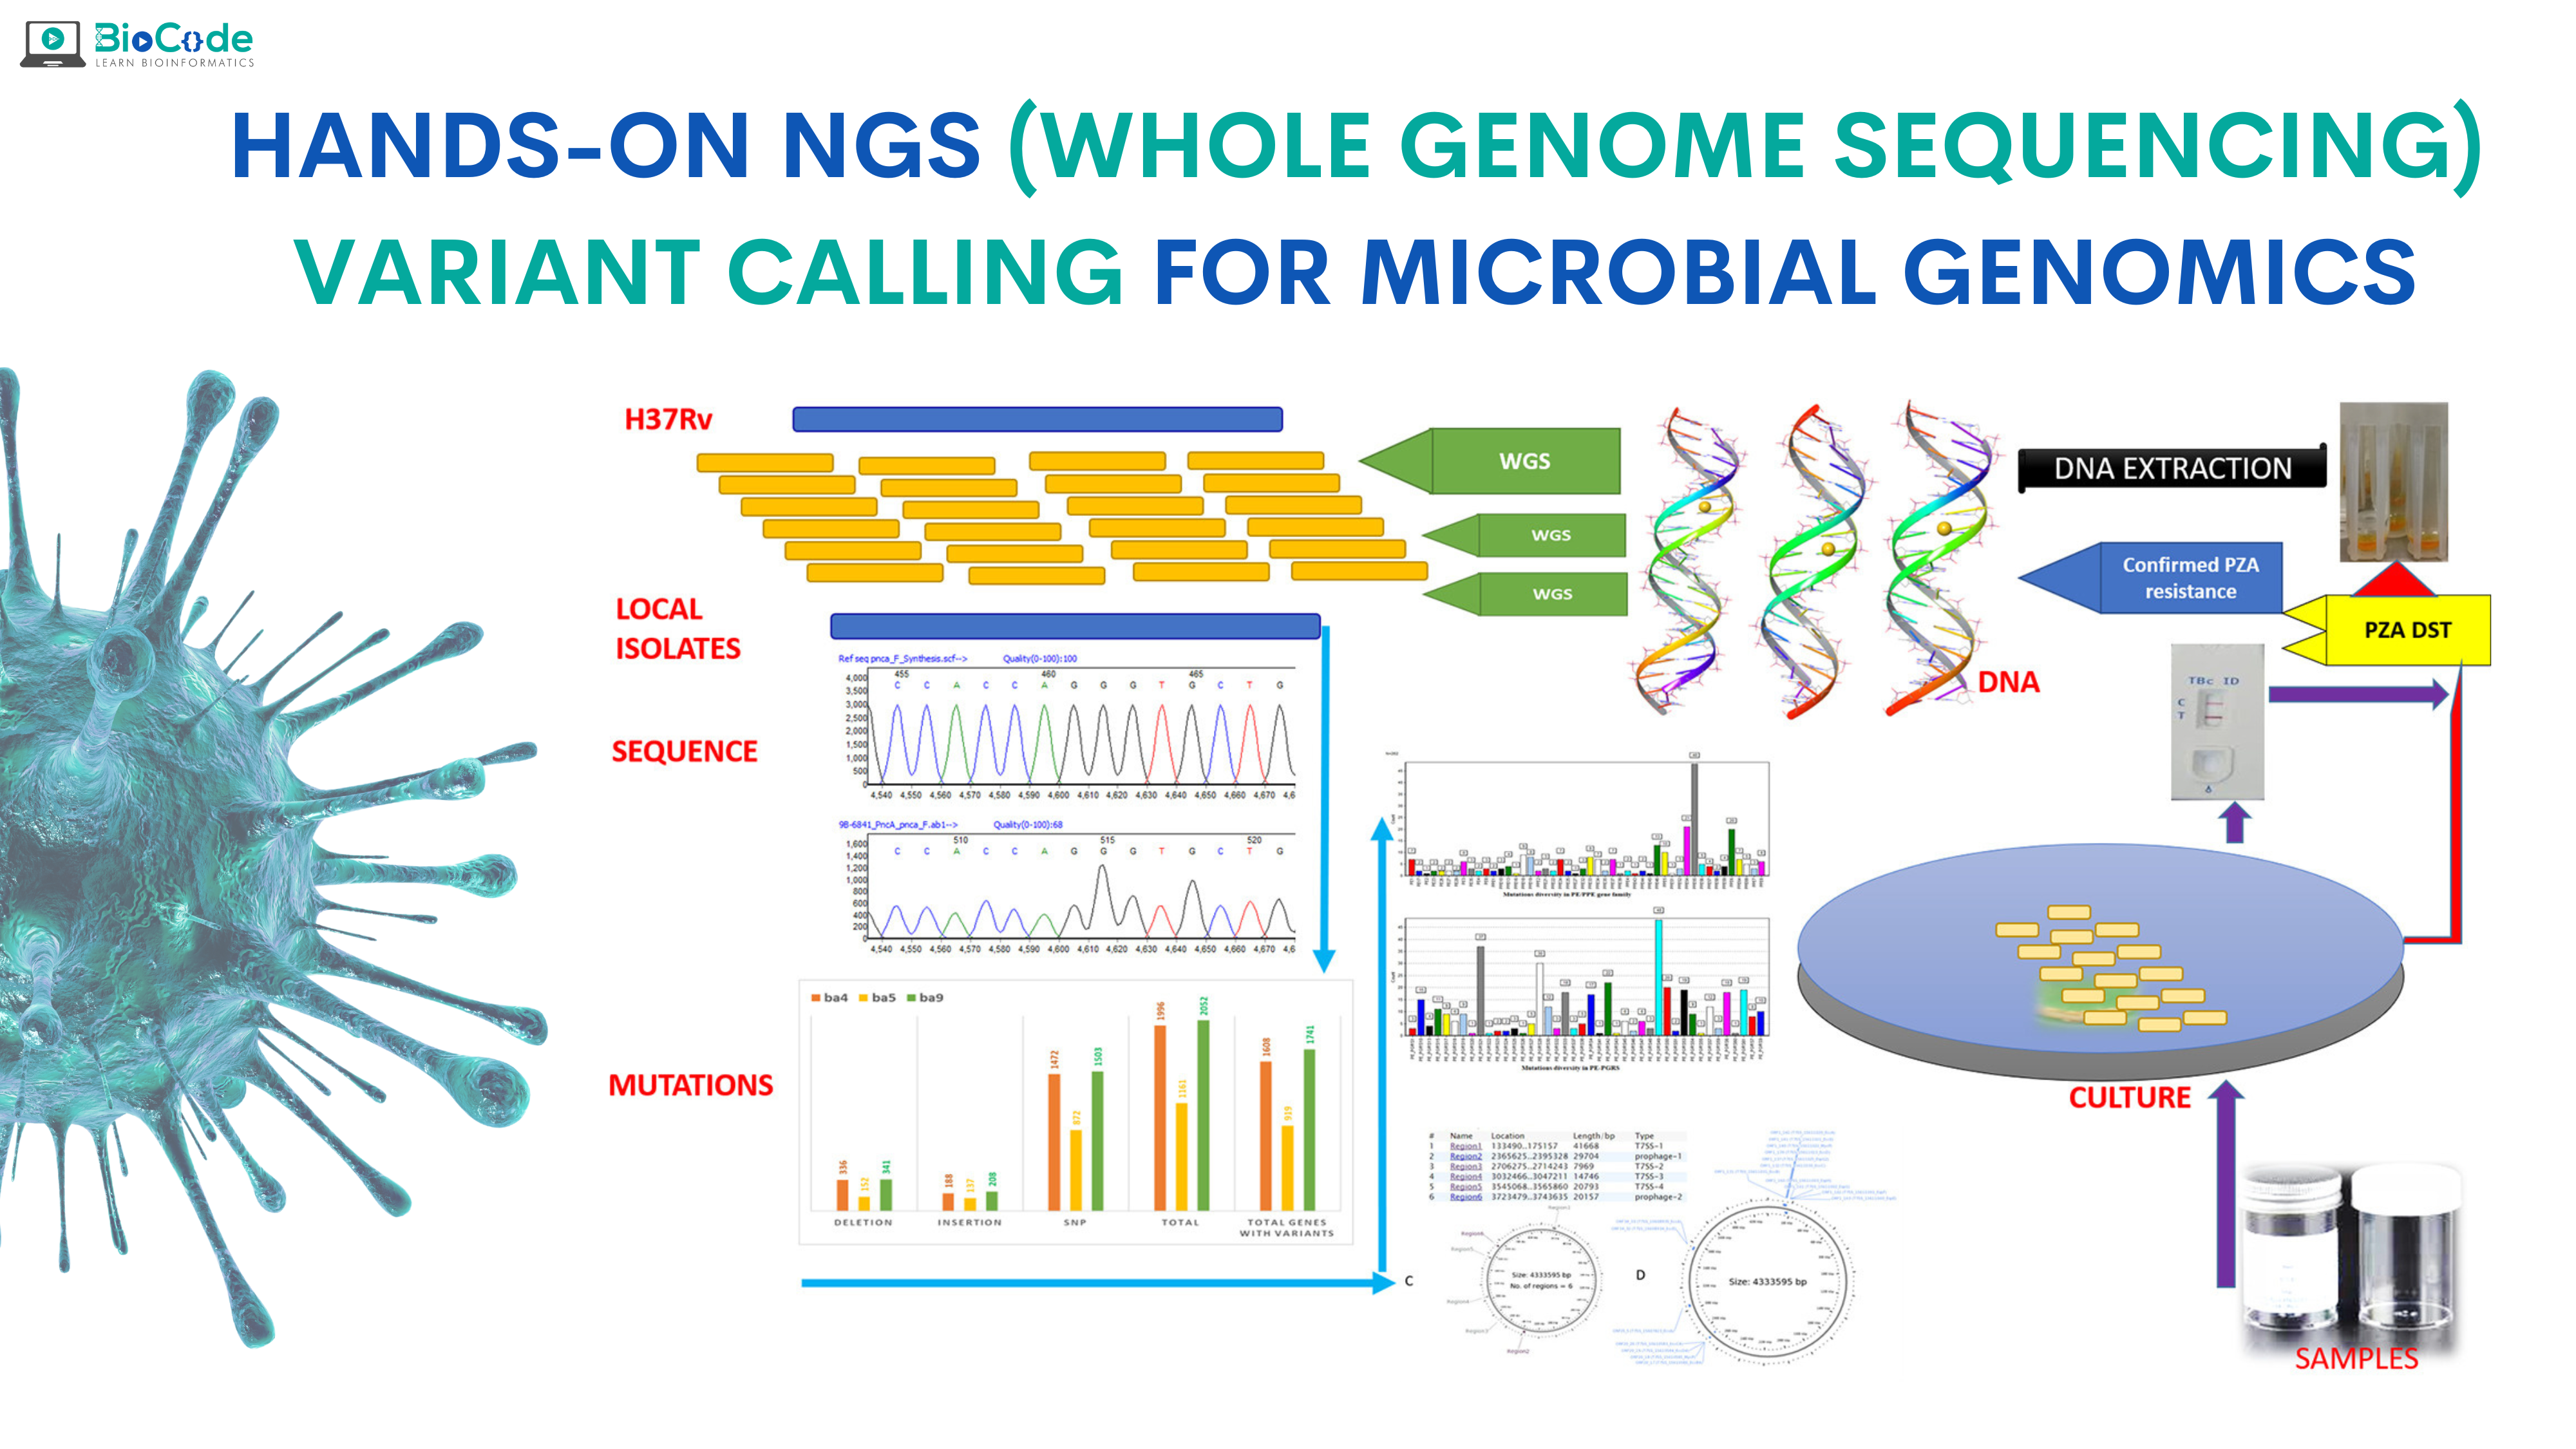 Hands-on: NGS (Whole Genome Sequencing) Variant Calling for Microbial Genomics